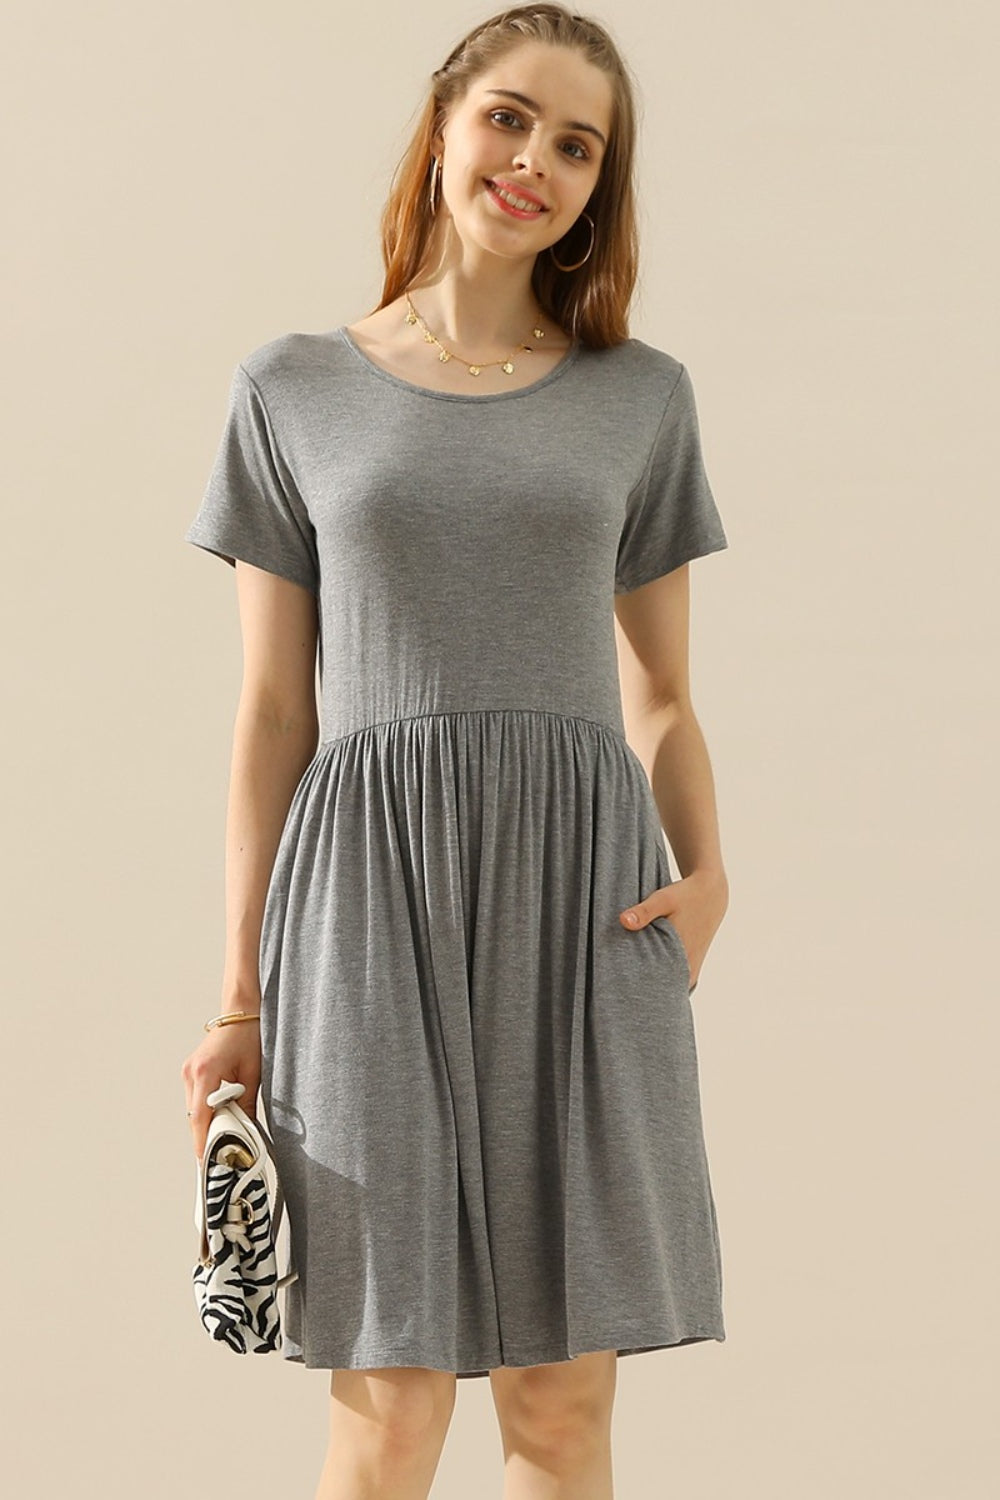 Ninexis Full Size Round Neck Ruched Dress with Pockets - H GREY / S - DRESSES - Mixed